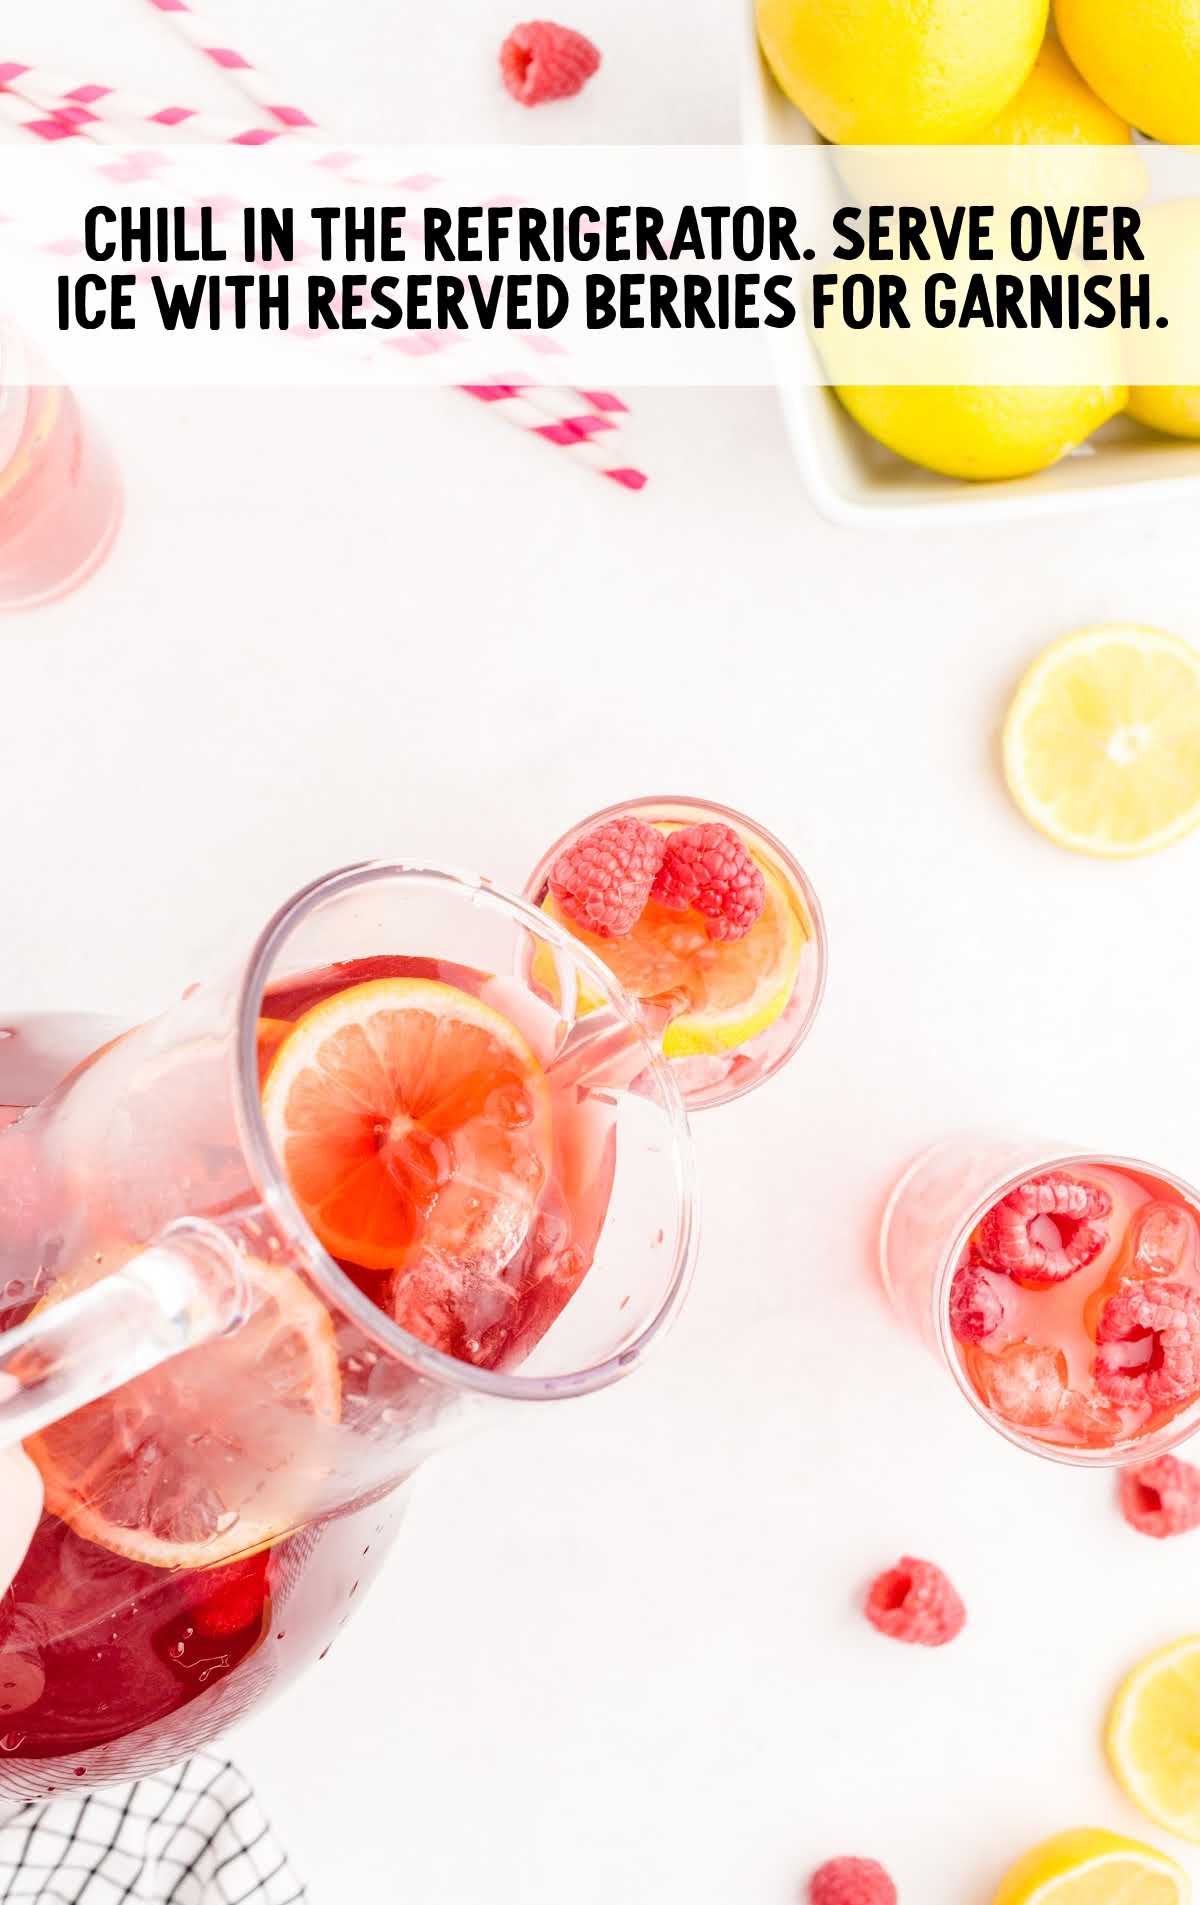 Raspberry Iced Tea being poured into a glass of lemon slices and berries